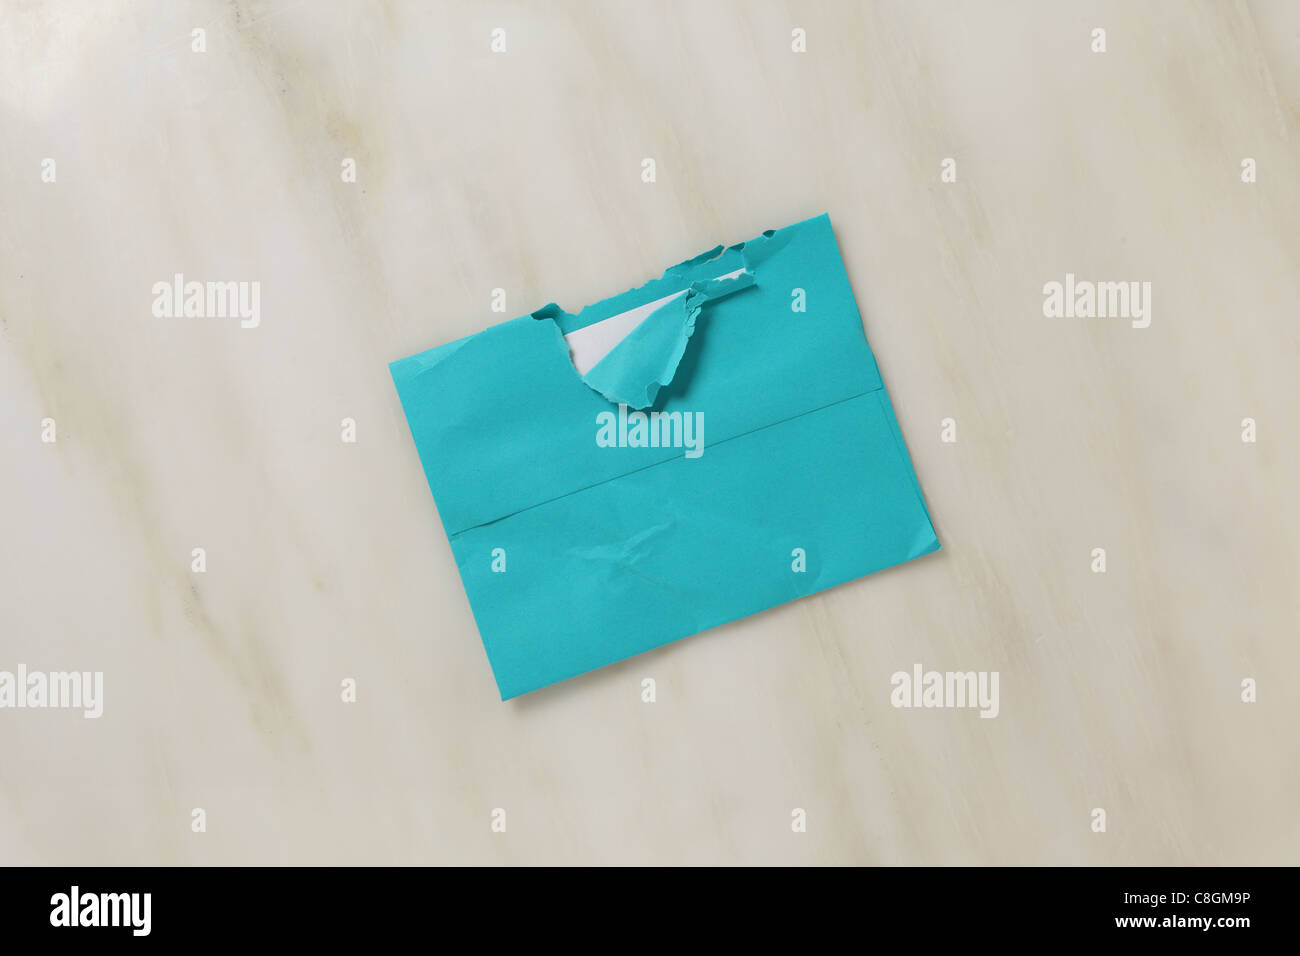 A used and slightly torn open postal envelope on a marble surface Bright teal blue colored envelope Stock Photo